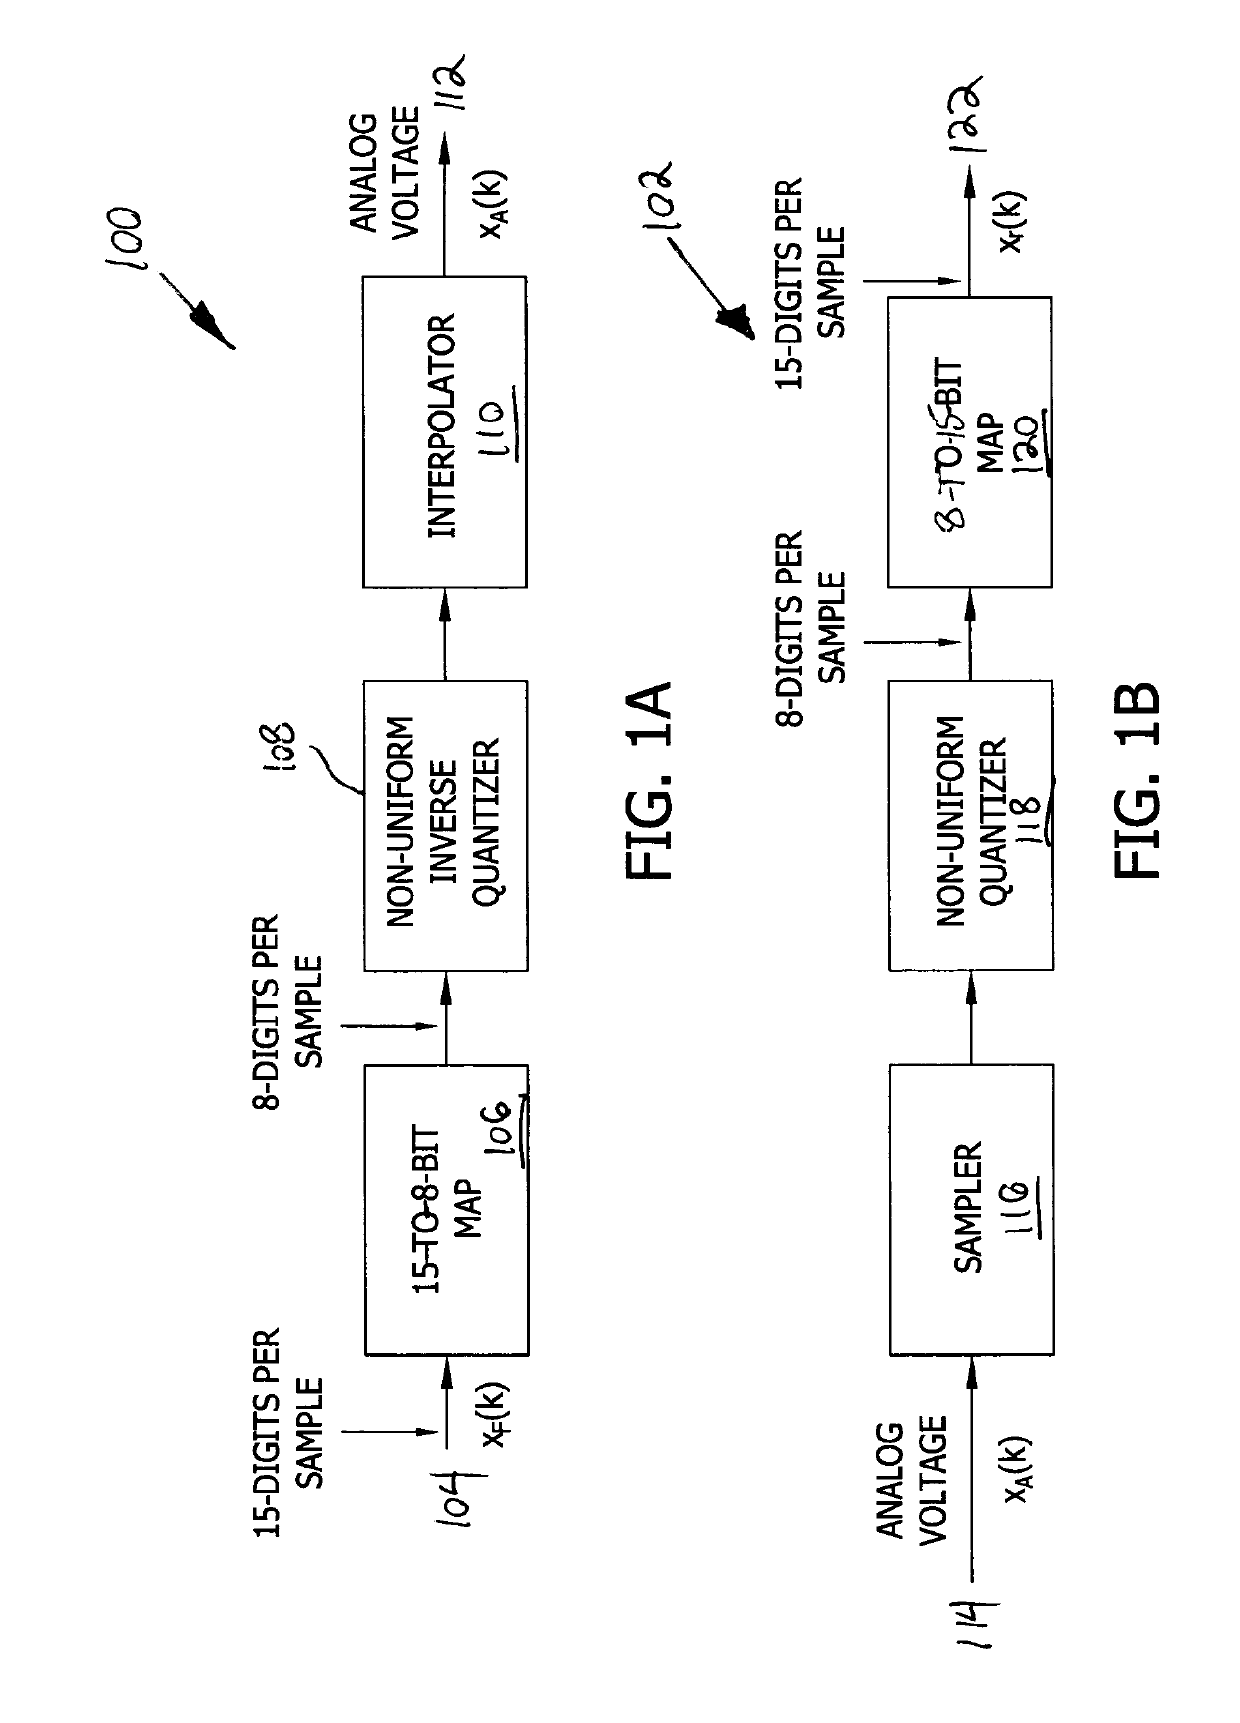 System and methods for data compression and nonuniform quantizers